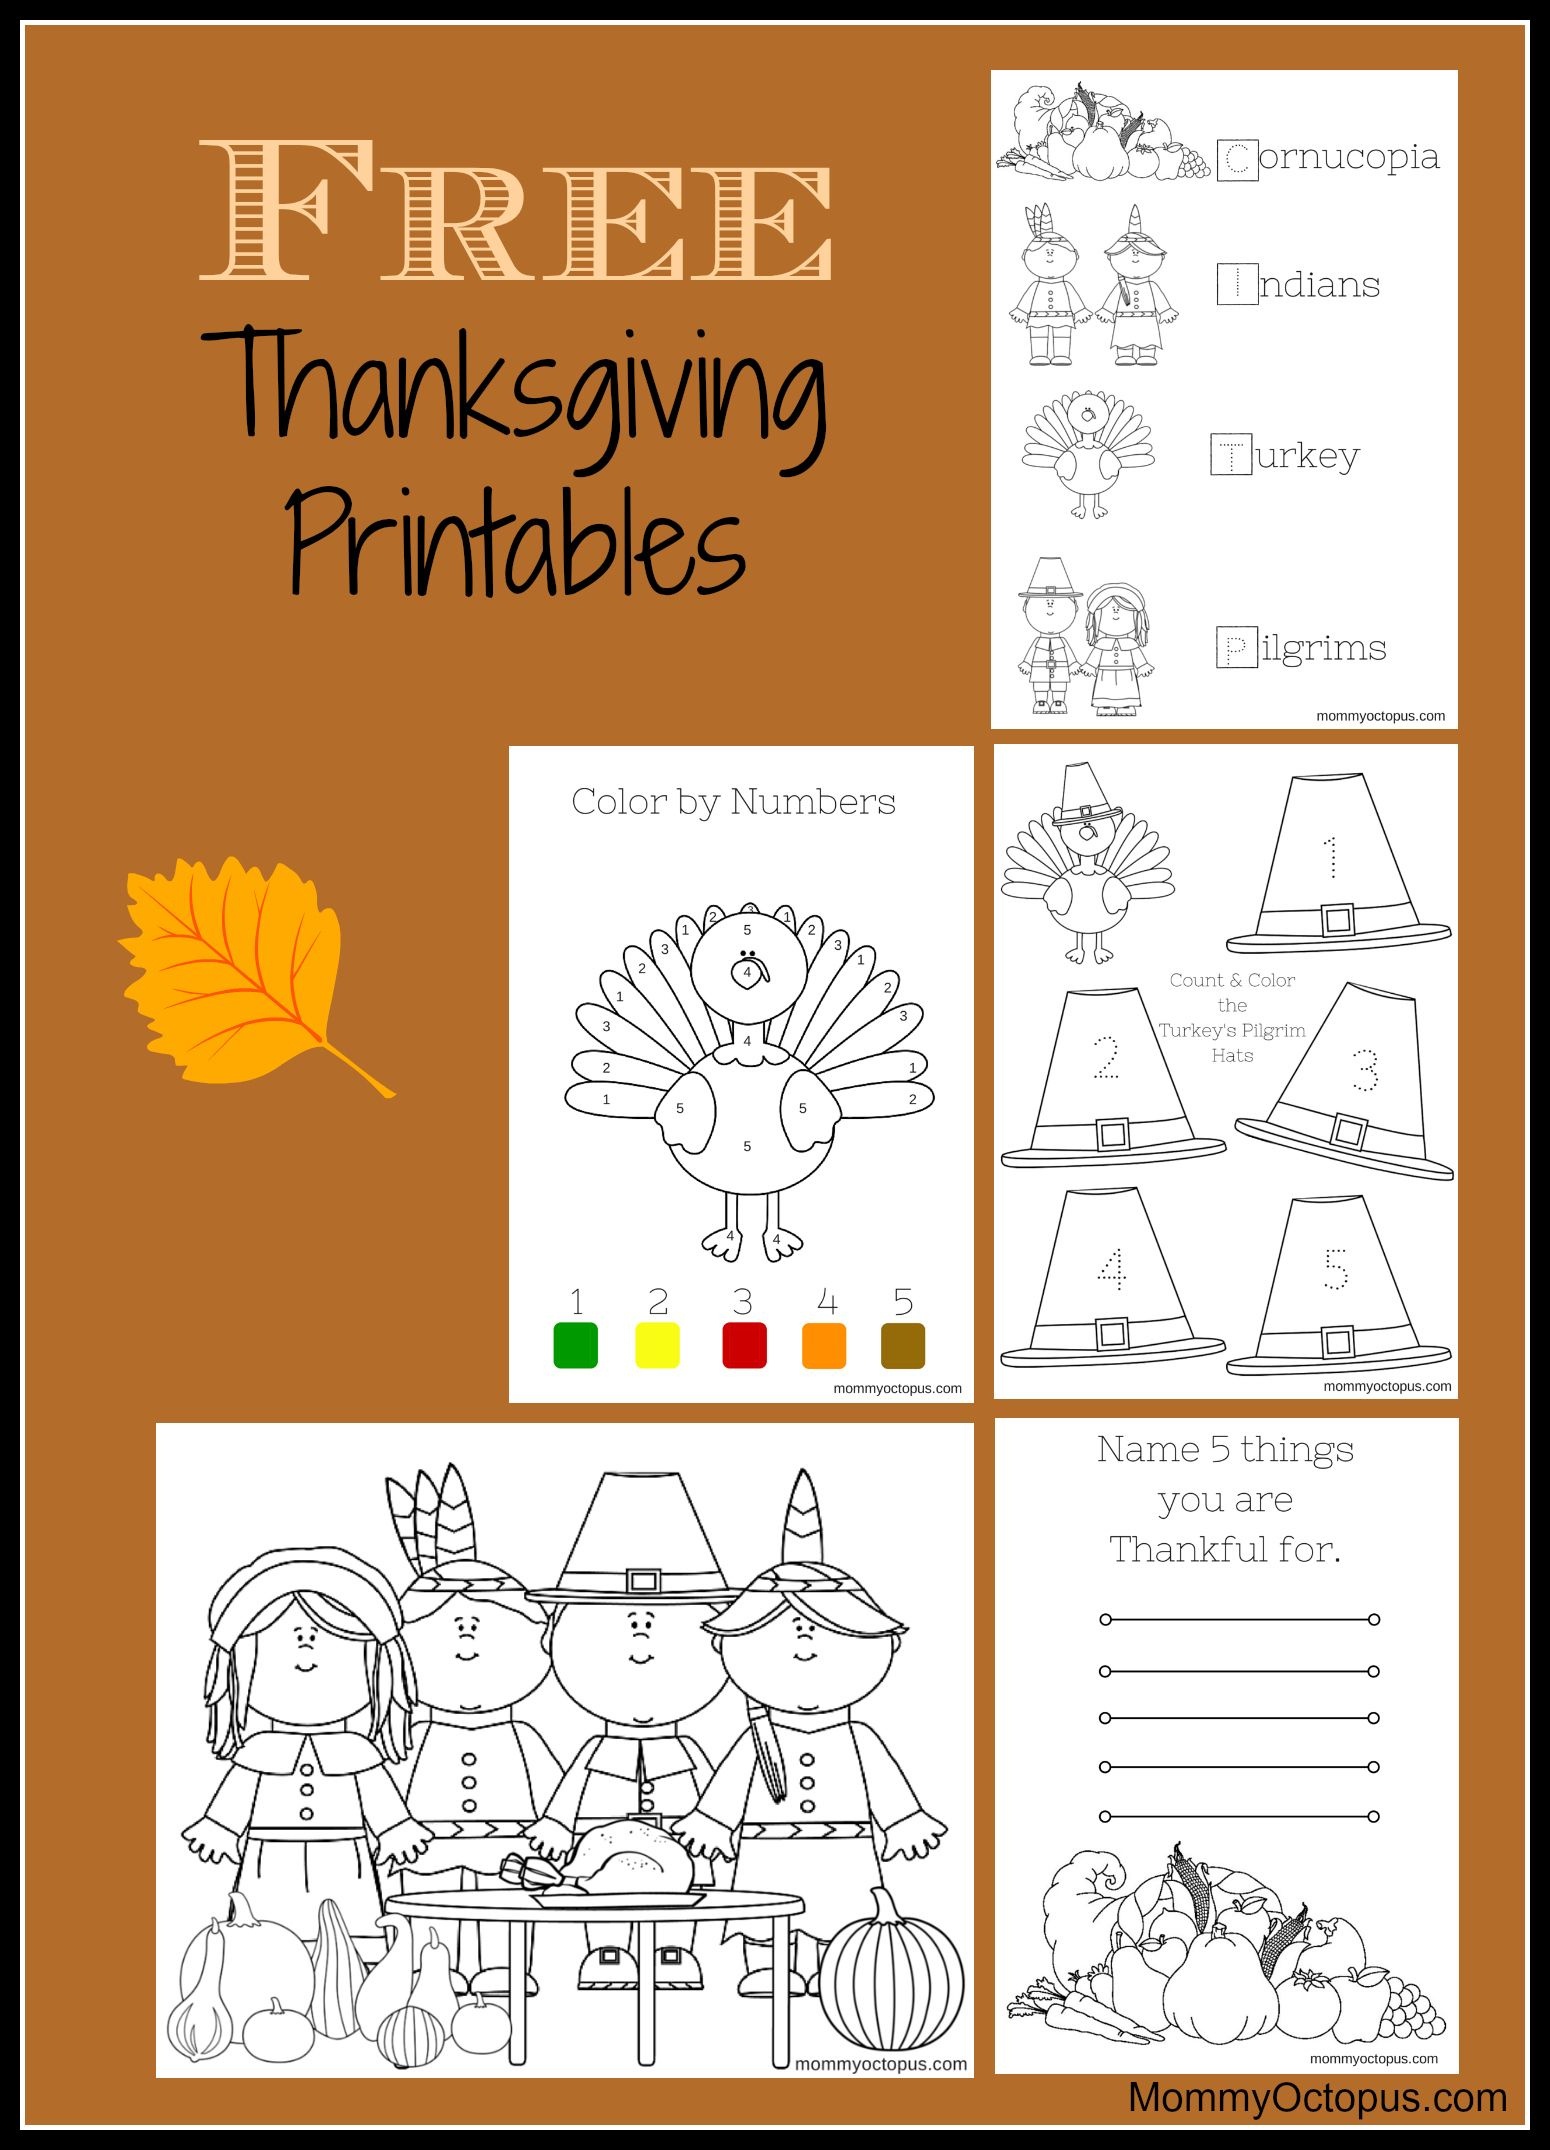 Free Thanksgiving Printable Activity Sheets! | Thanksgiving &amp;amp; Fall - Free Printable Thanksgiving Activities